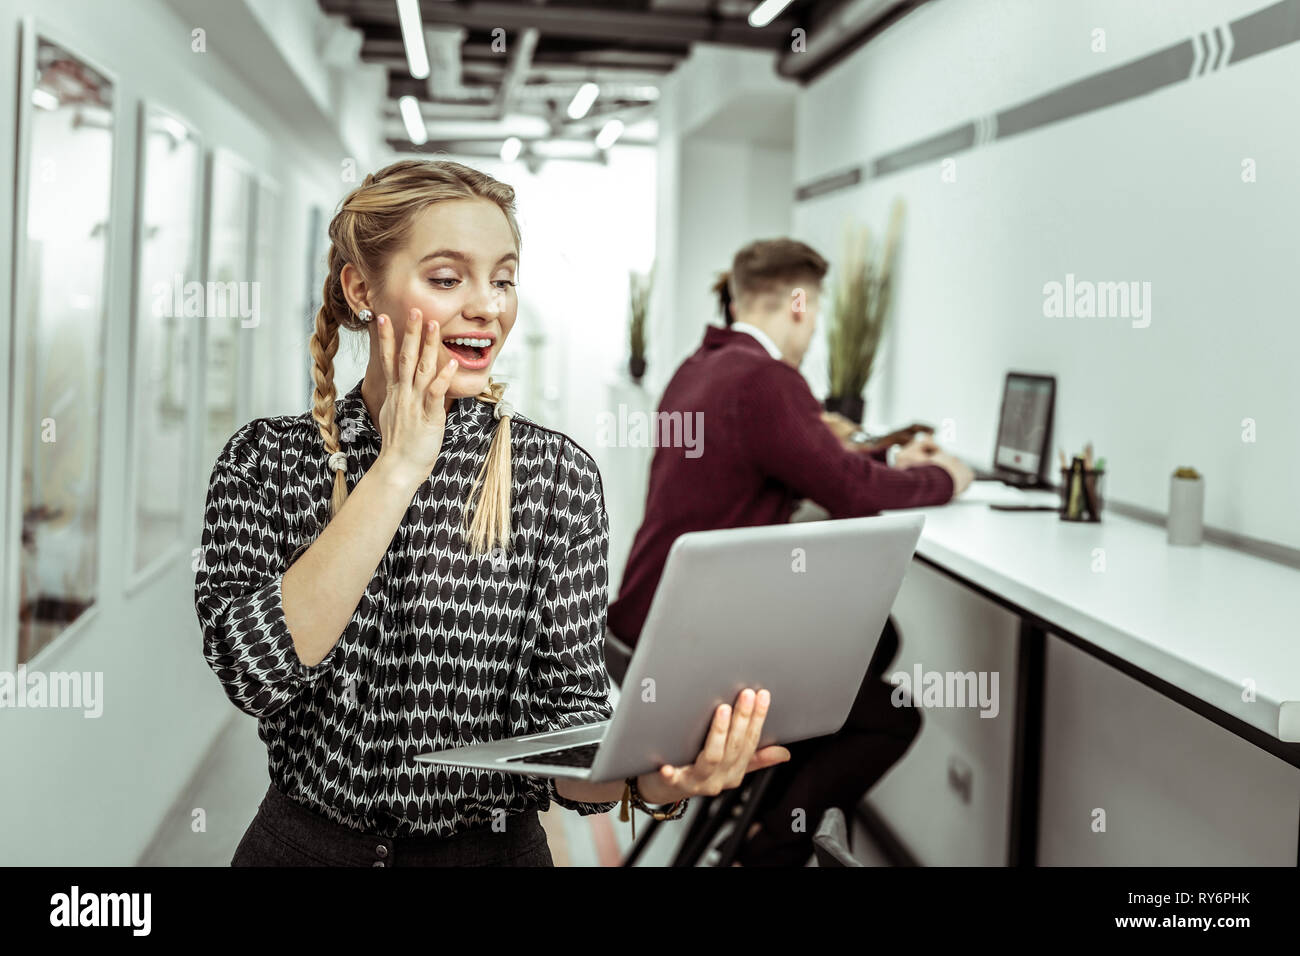 Surprised light-haired female office worker being expressive during conversation Stock Photo